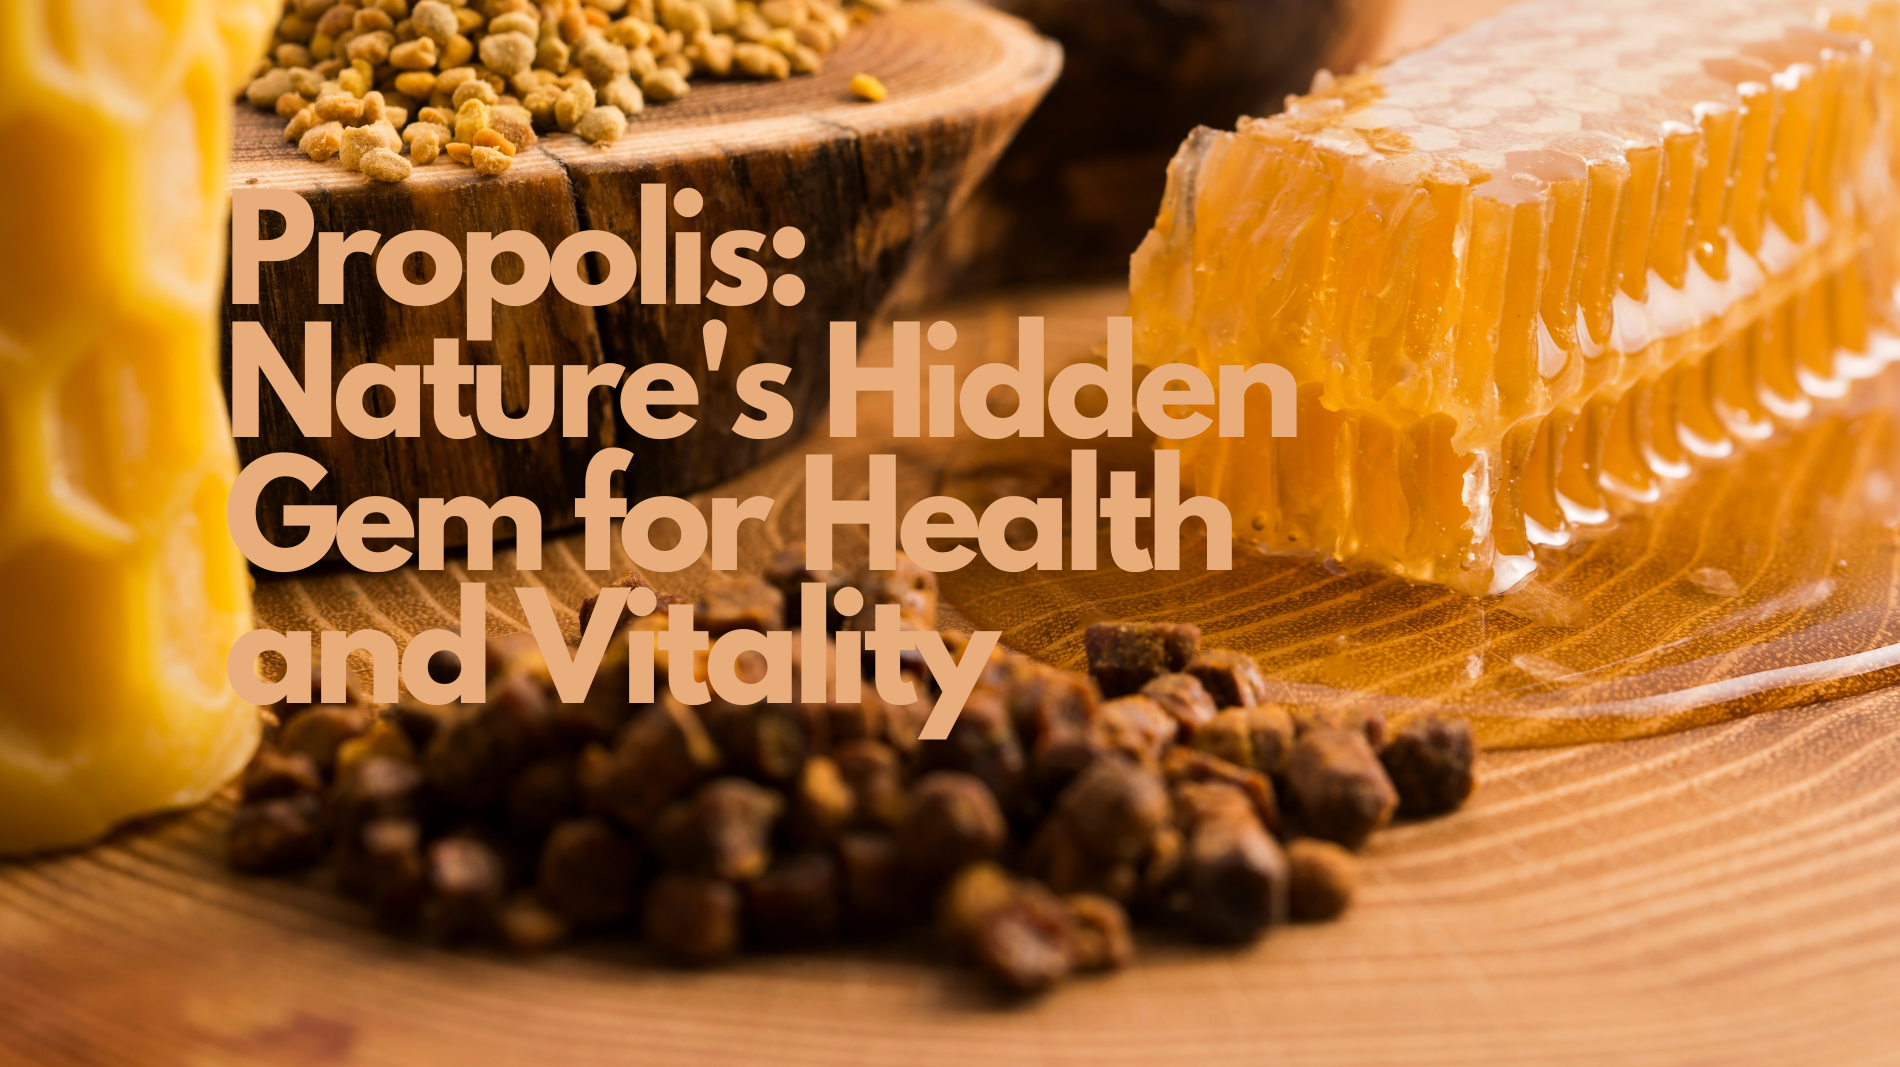 Nature’s Alchemy: The Transformative Power of Propolis